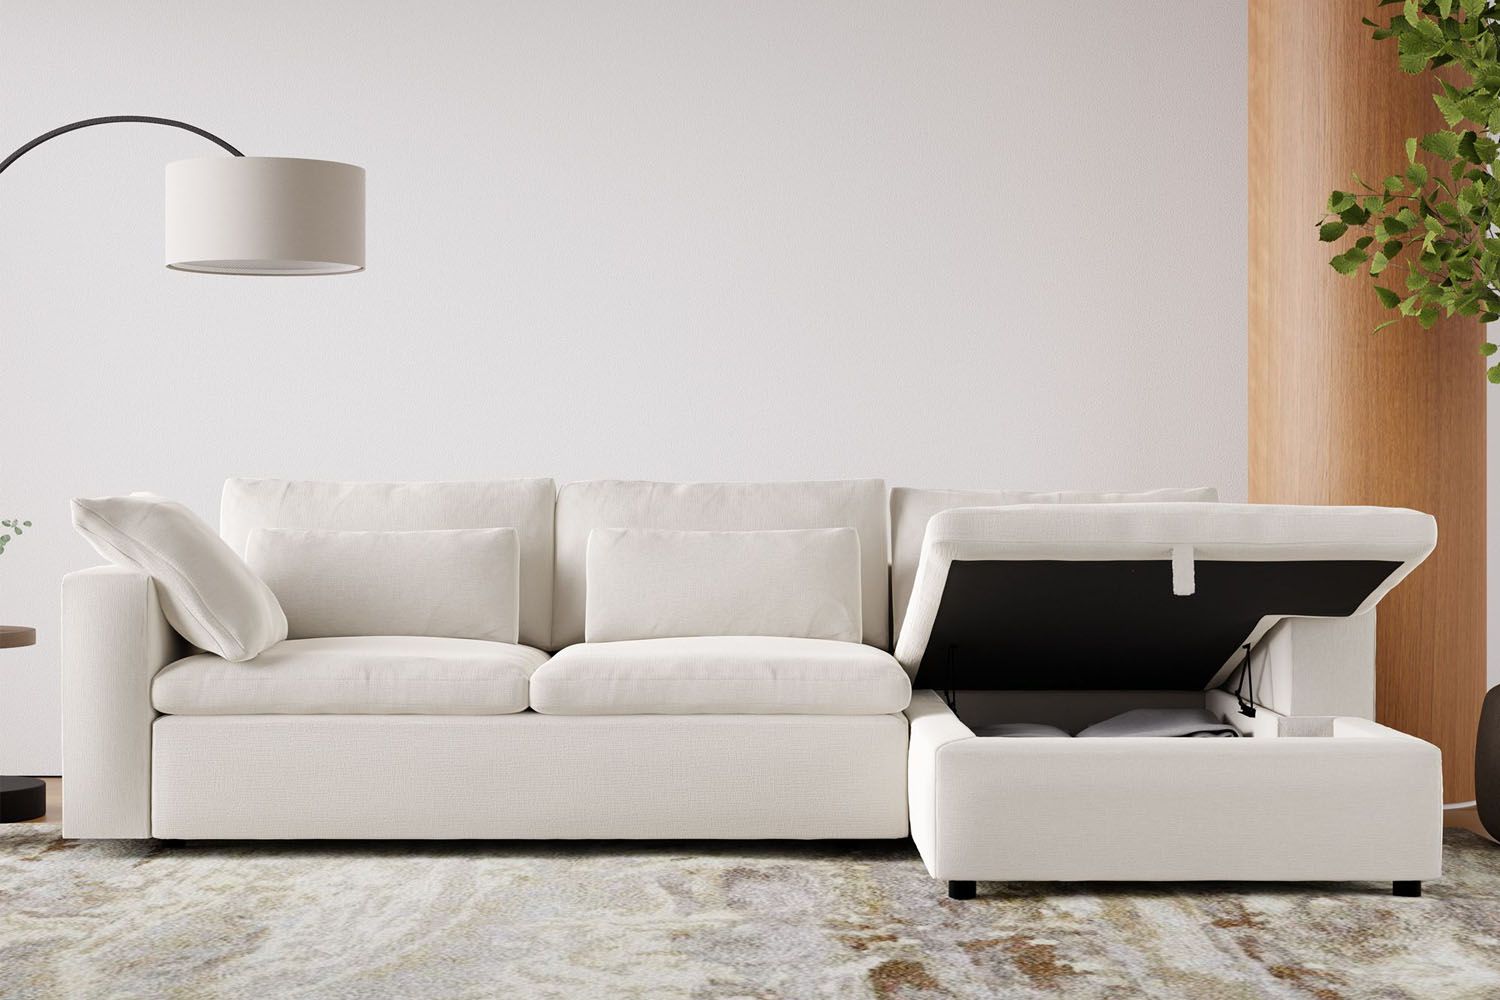 Sectional Sofas With Storage For Families: 10 Easy Pieces Within Sectional Sofa With Storage (View 10 of 20)